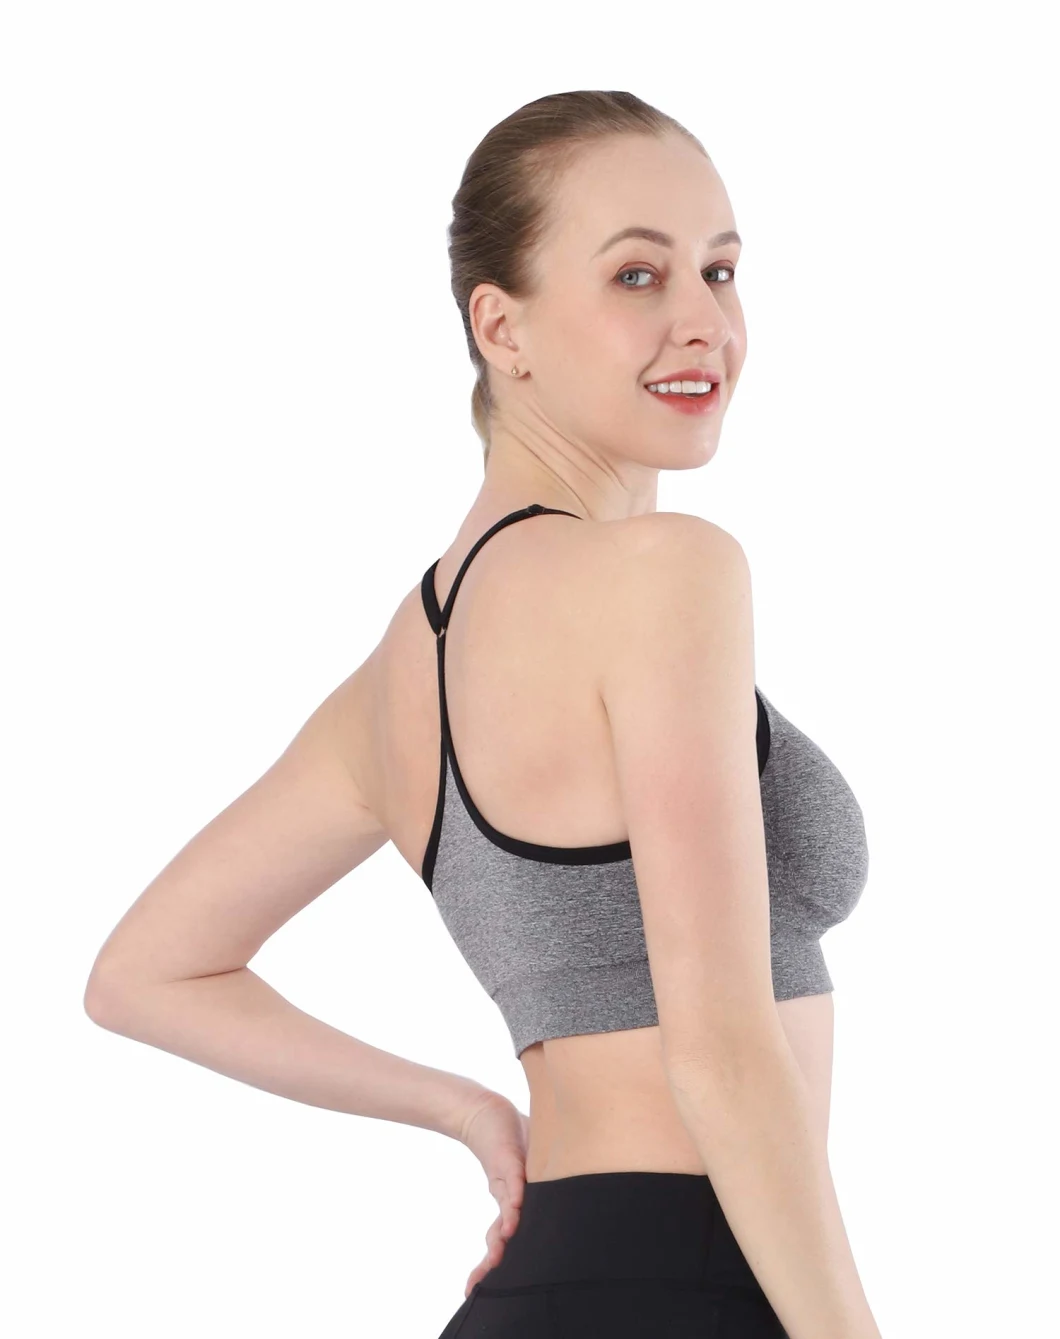 AG Seamless Sports Bra Wirefree Yoga Bra with Removable Pads for Women